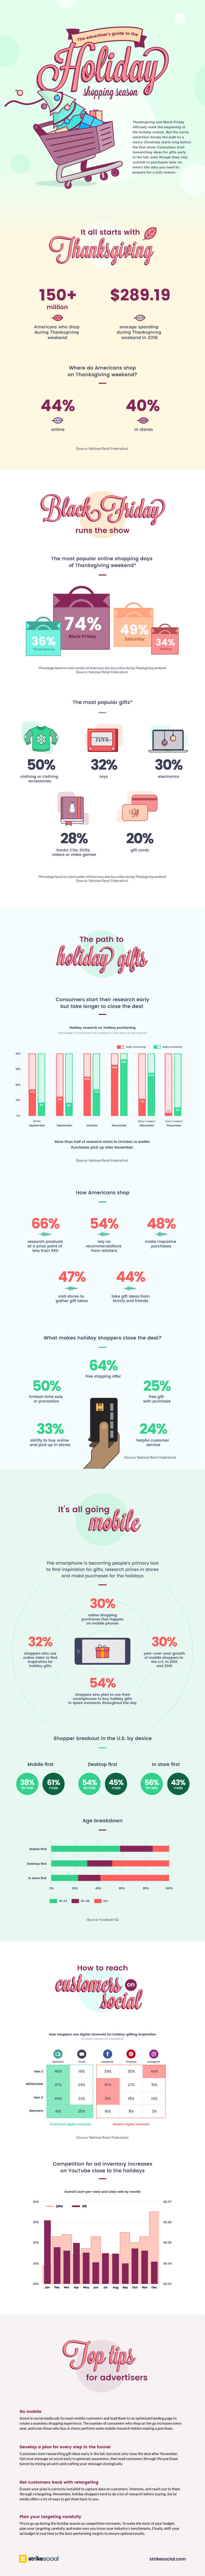 Christmas-&-Thanksgiving-Infographic